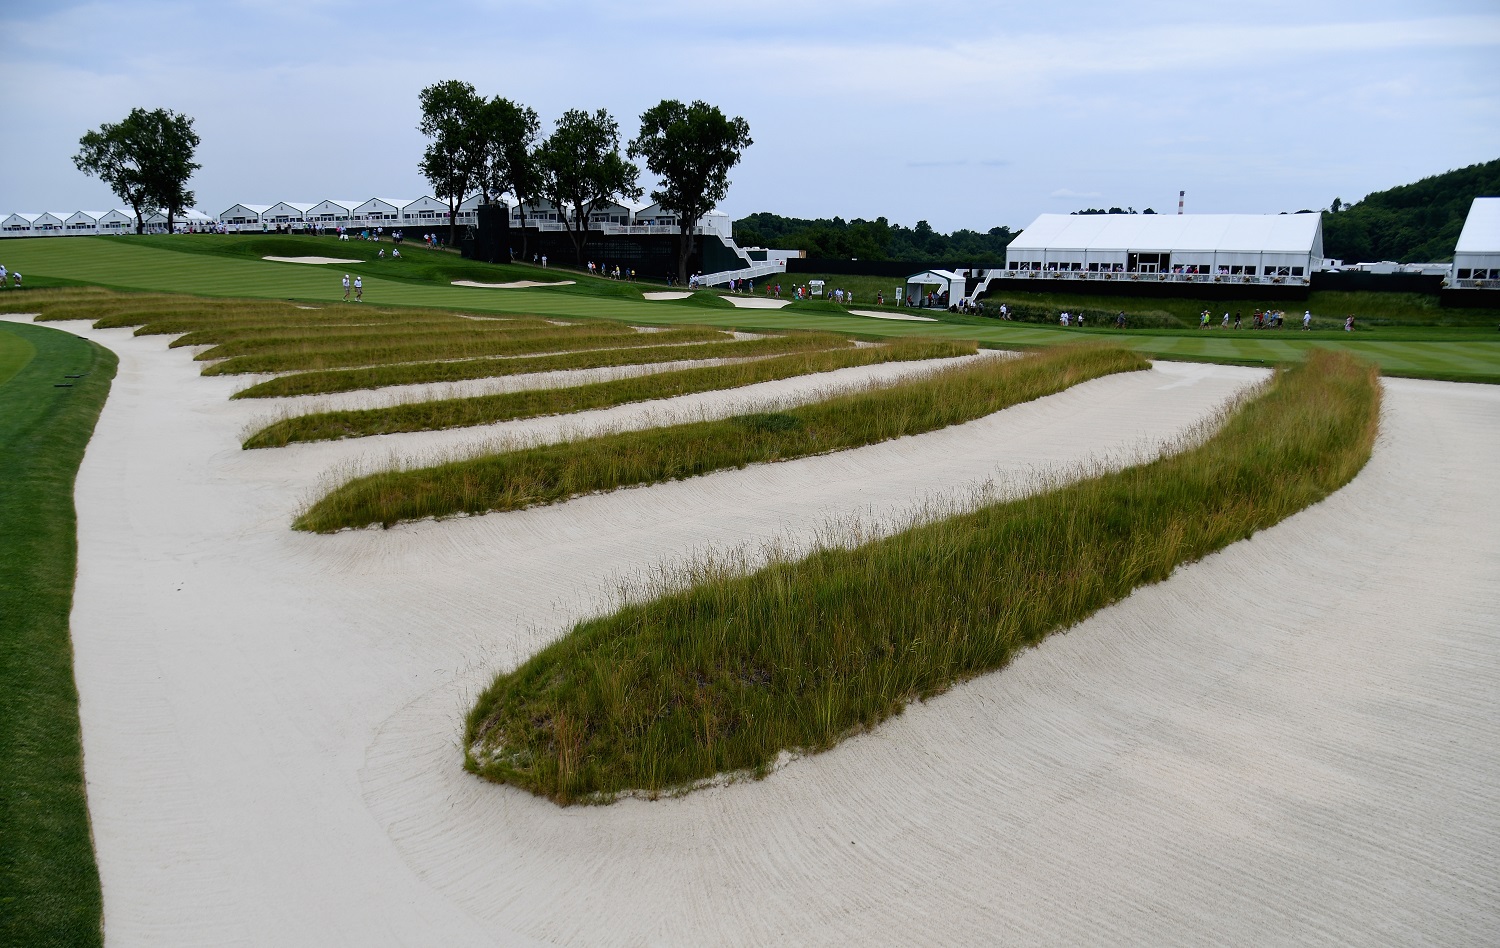 OAKMONT, PA - JUNE 15:  The church pew bunkers are seen during a practice round prior to the U.S. Open at Oakmont Country Club on June 15, 2016 in Oakmont, Pennsylvania.  (Photo by Ross Kinnaird/Getty Images)